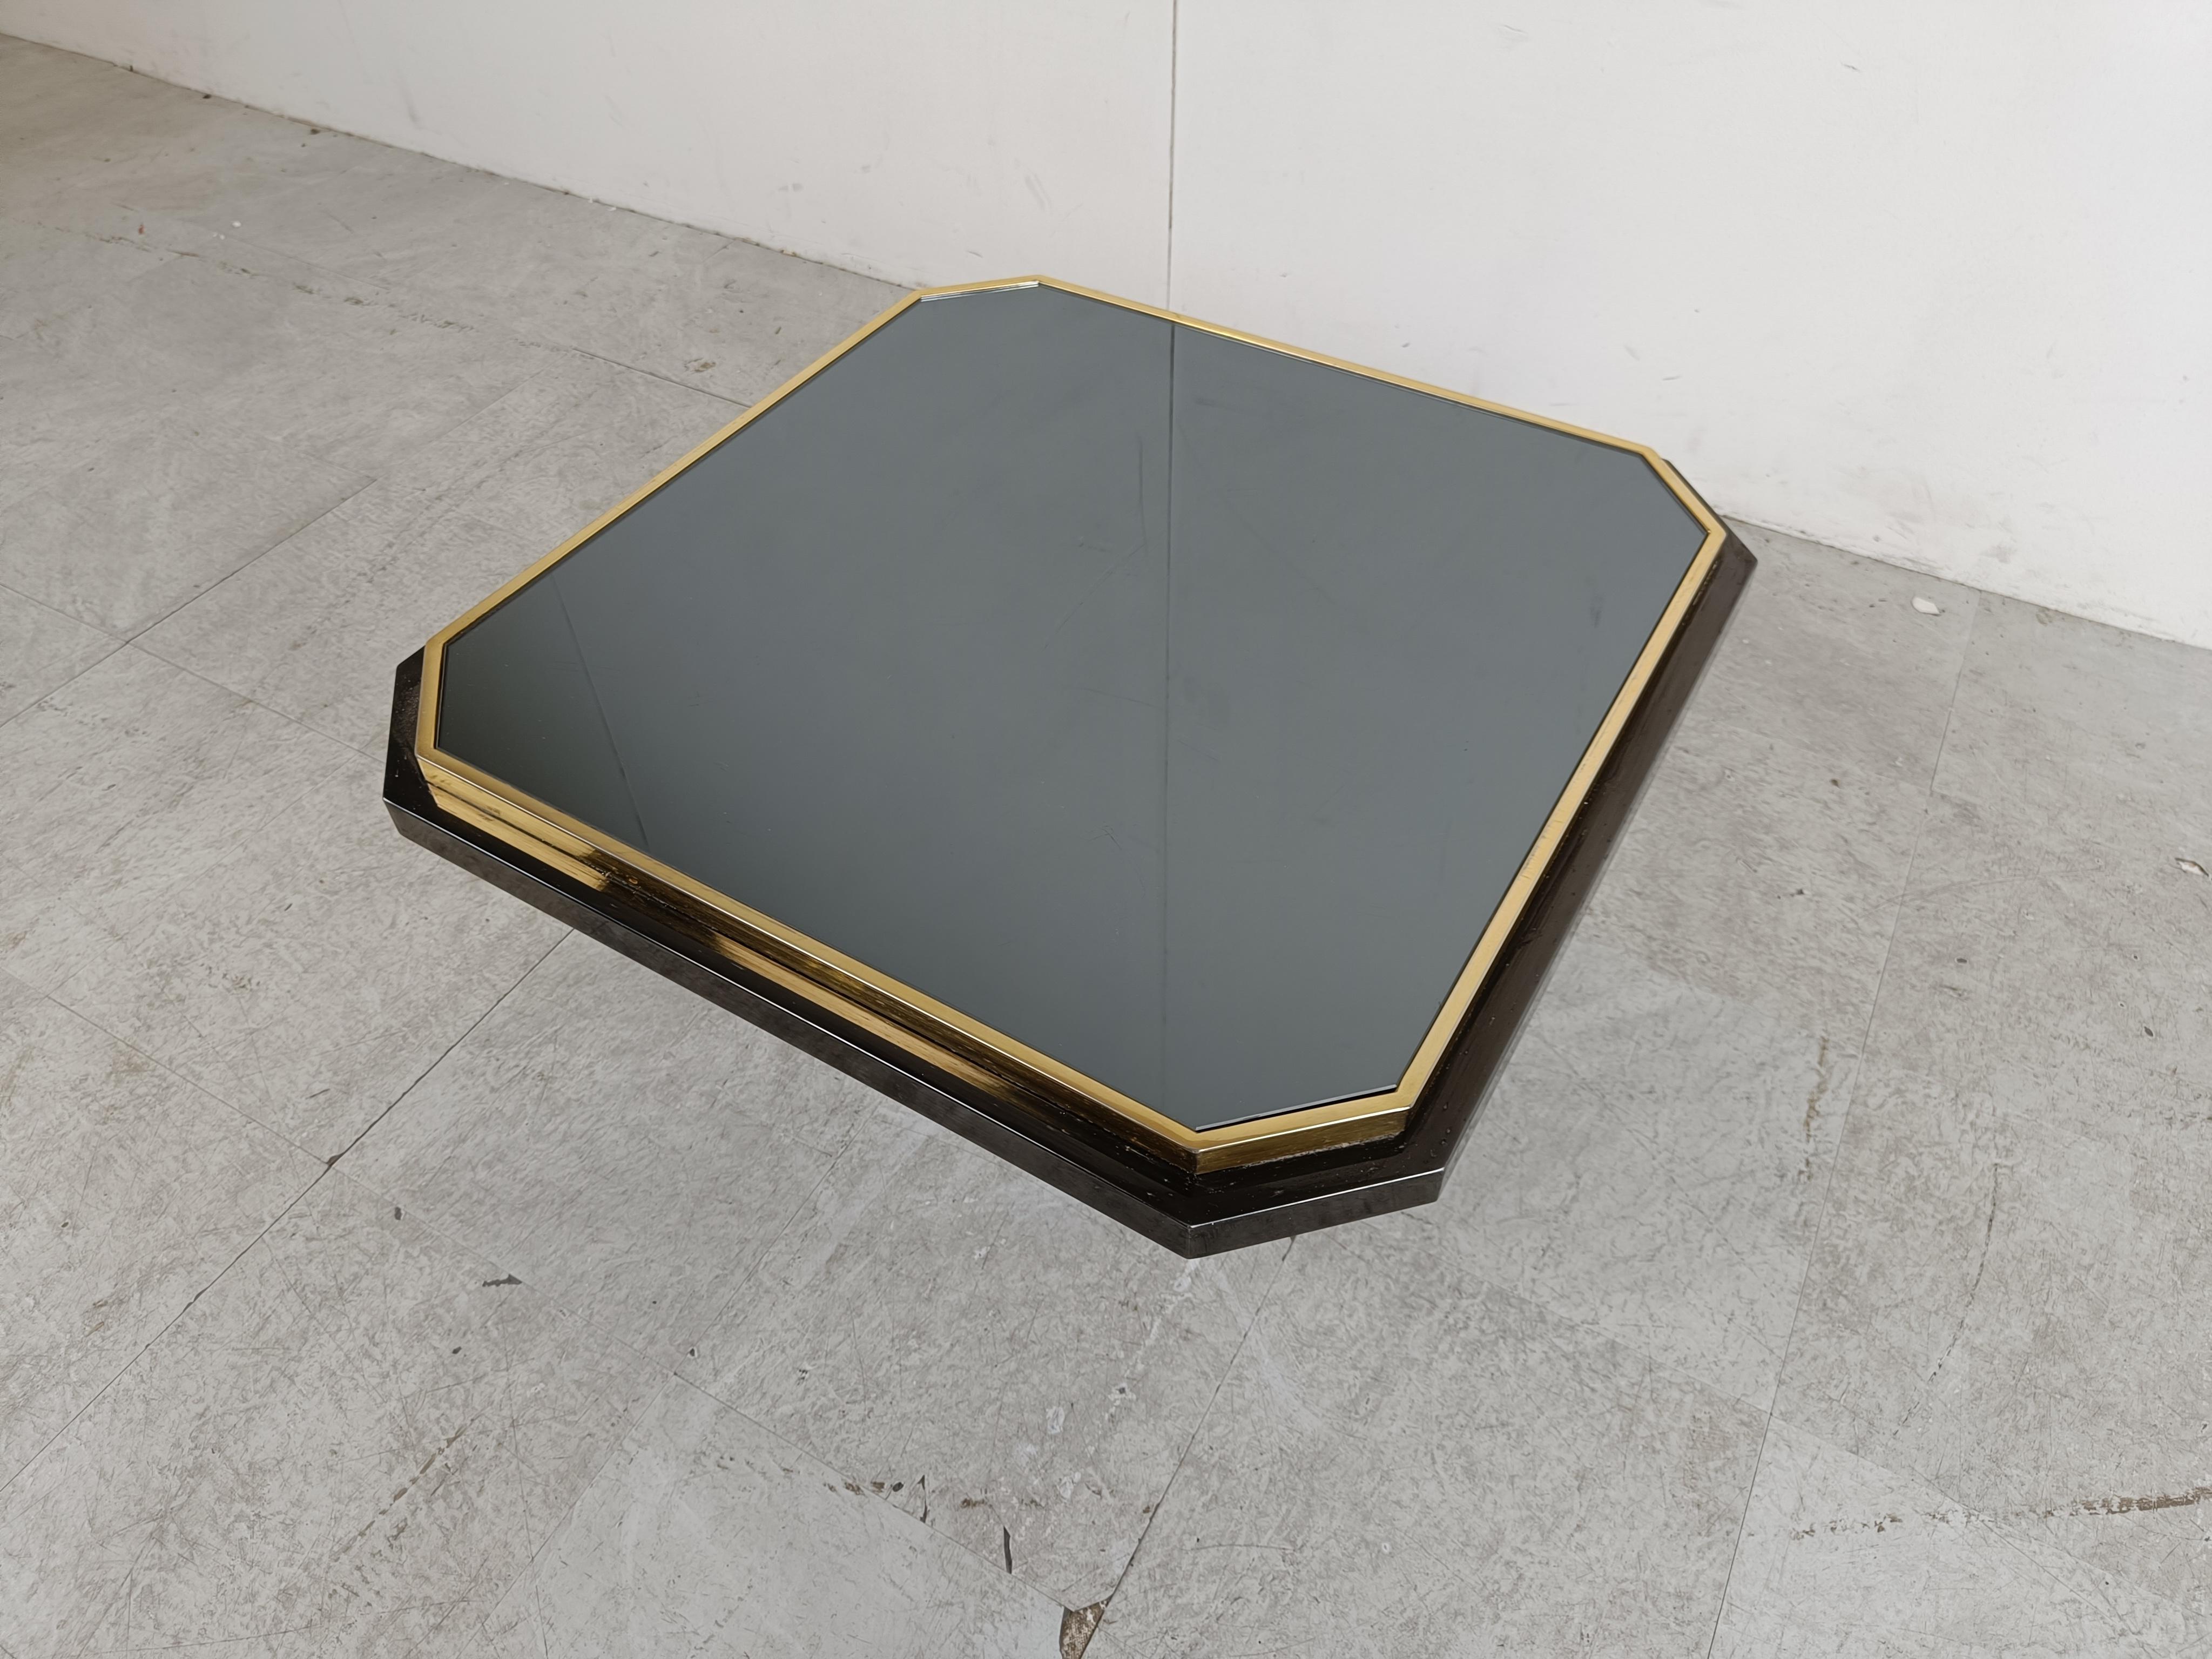 Quality 24kt gold layered and black metal coffee table with a smoked glass top.

The table was manufactured by Belgochrom and produced quality furniture pieces with a luxurious appeal.

The table has had one previous owner and was maintained very